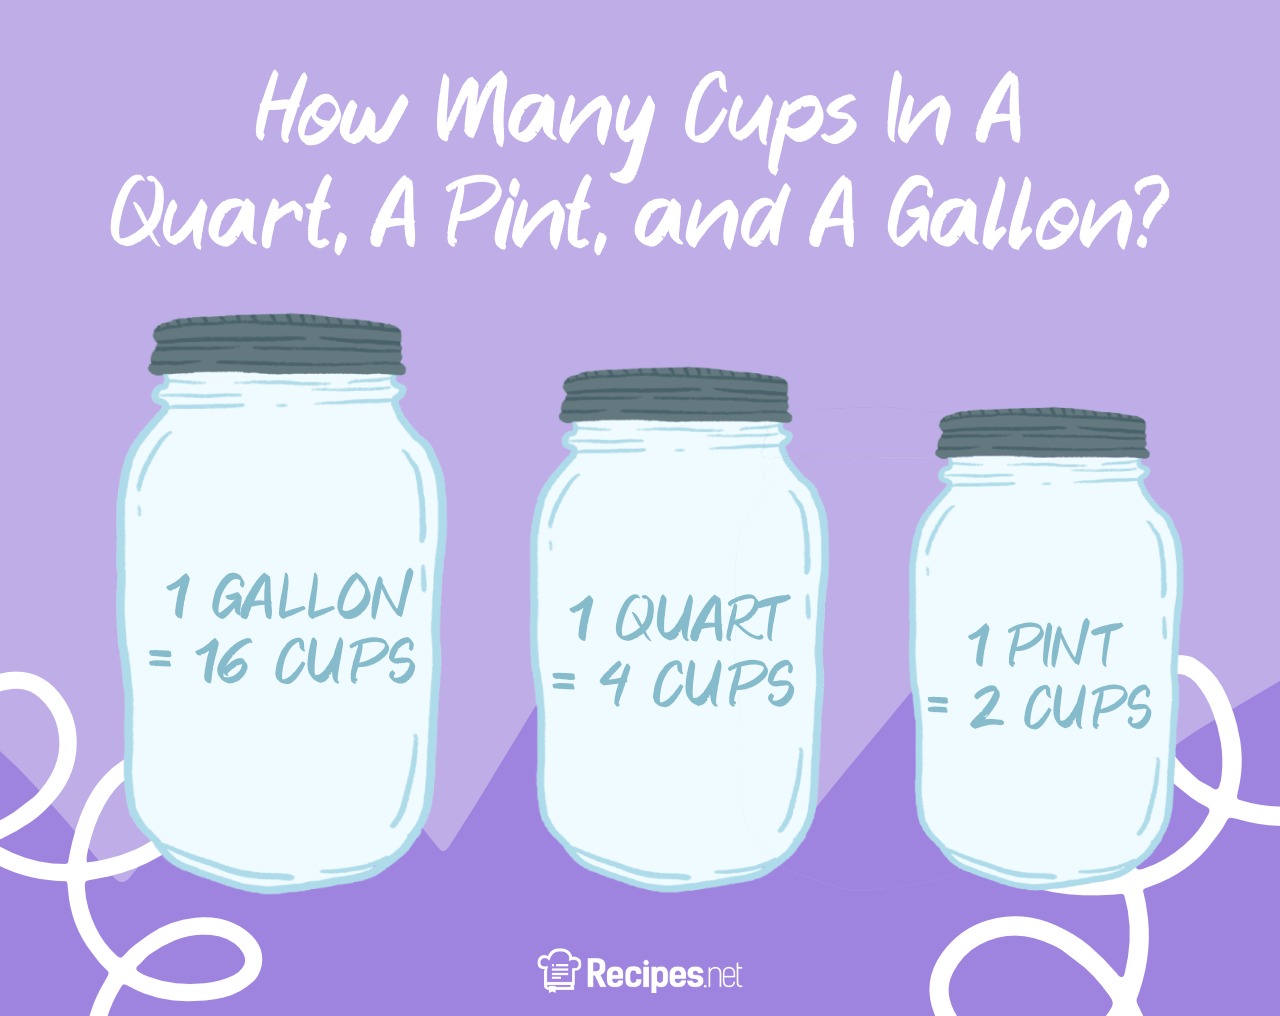 How Many Cups in a Quart, a Pint, and a Gallon? (With Conversion